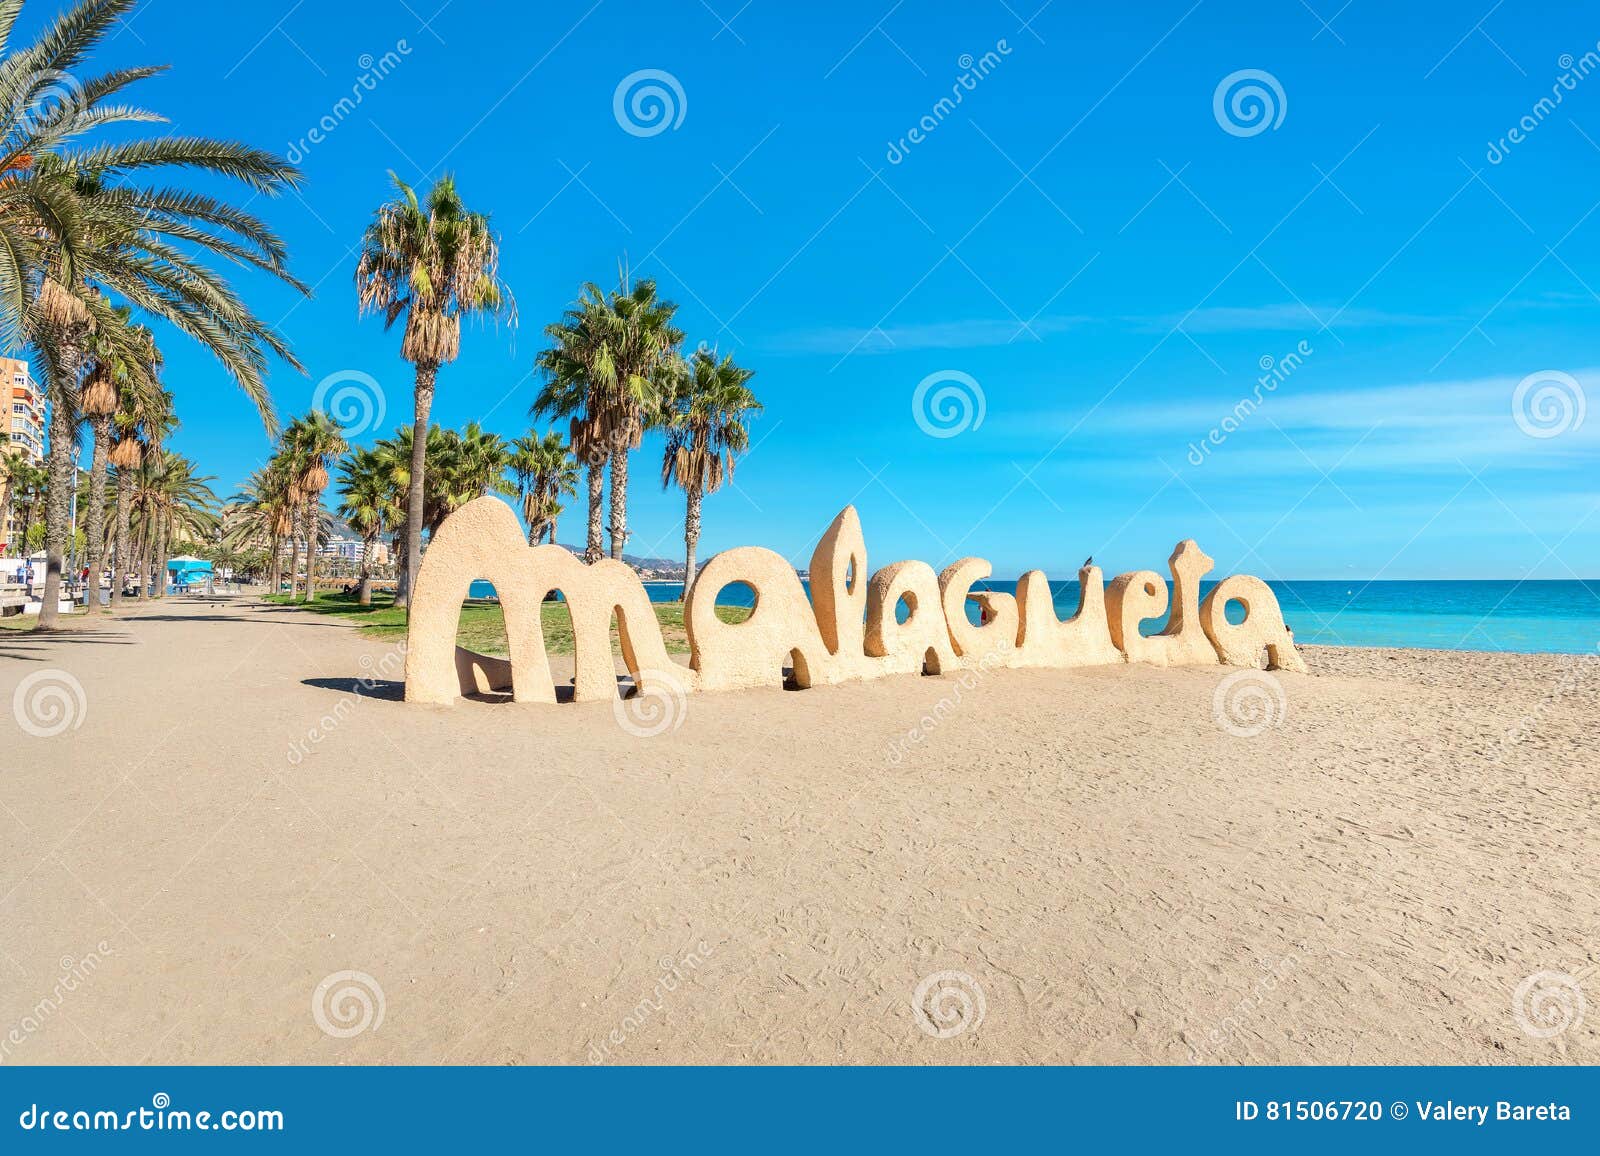 Andalusia Spain Cadiz Bunker Bay Beach Old Concrete Stock Photography ...